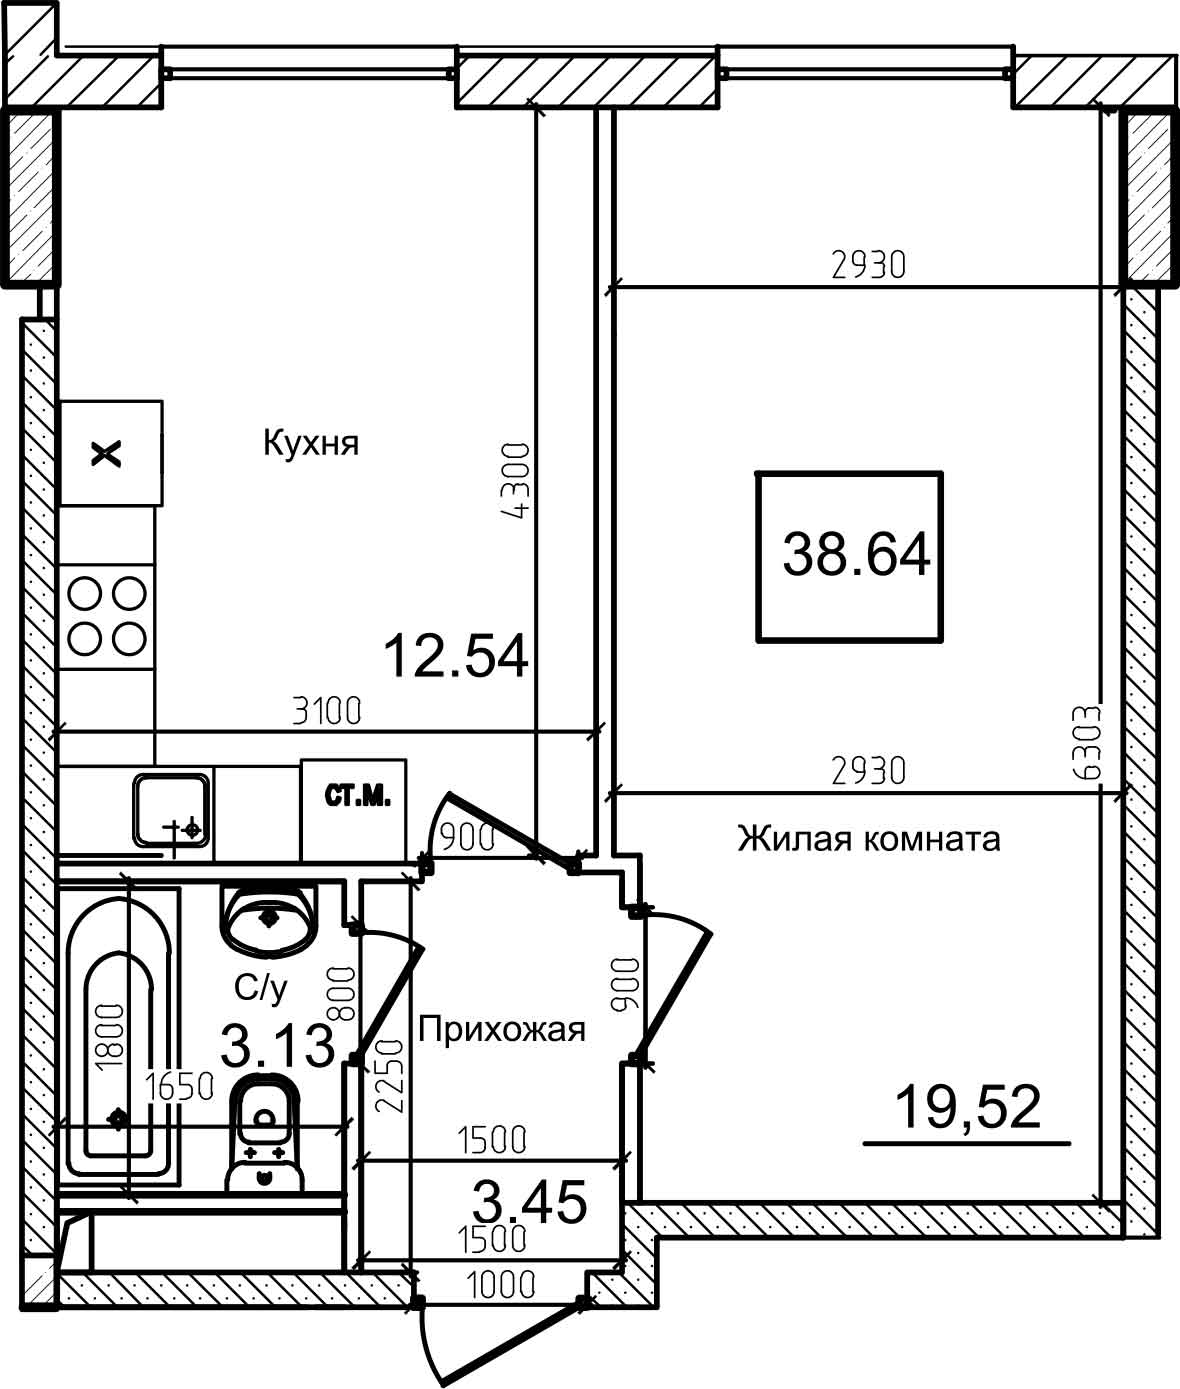 Planning 1-rm flats area 38.3m2, AB-08-04/00009.